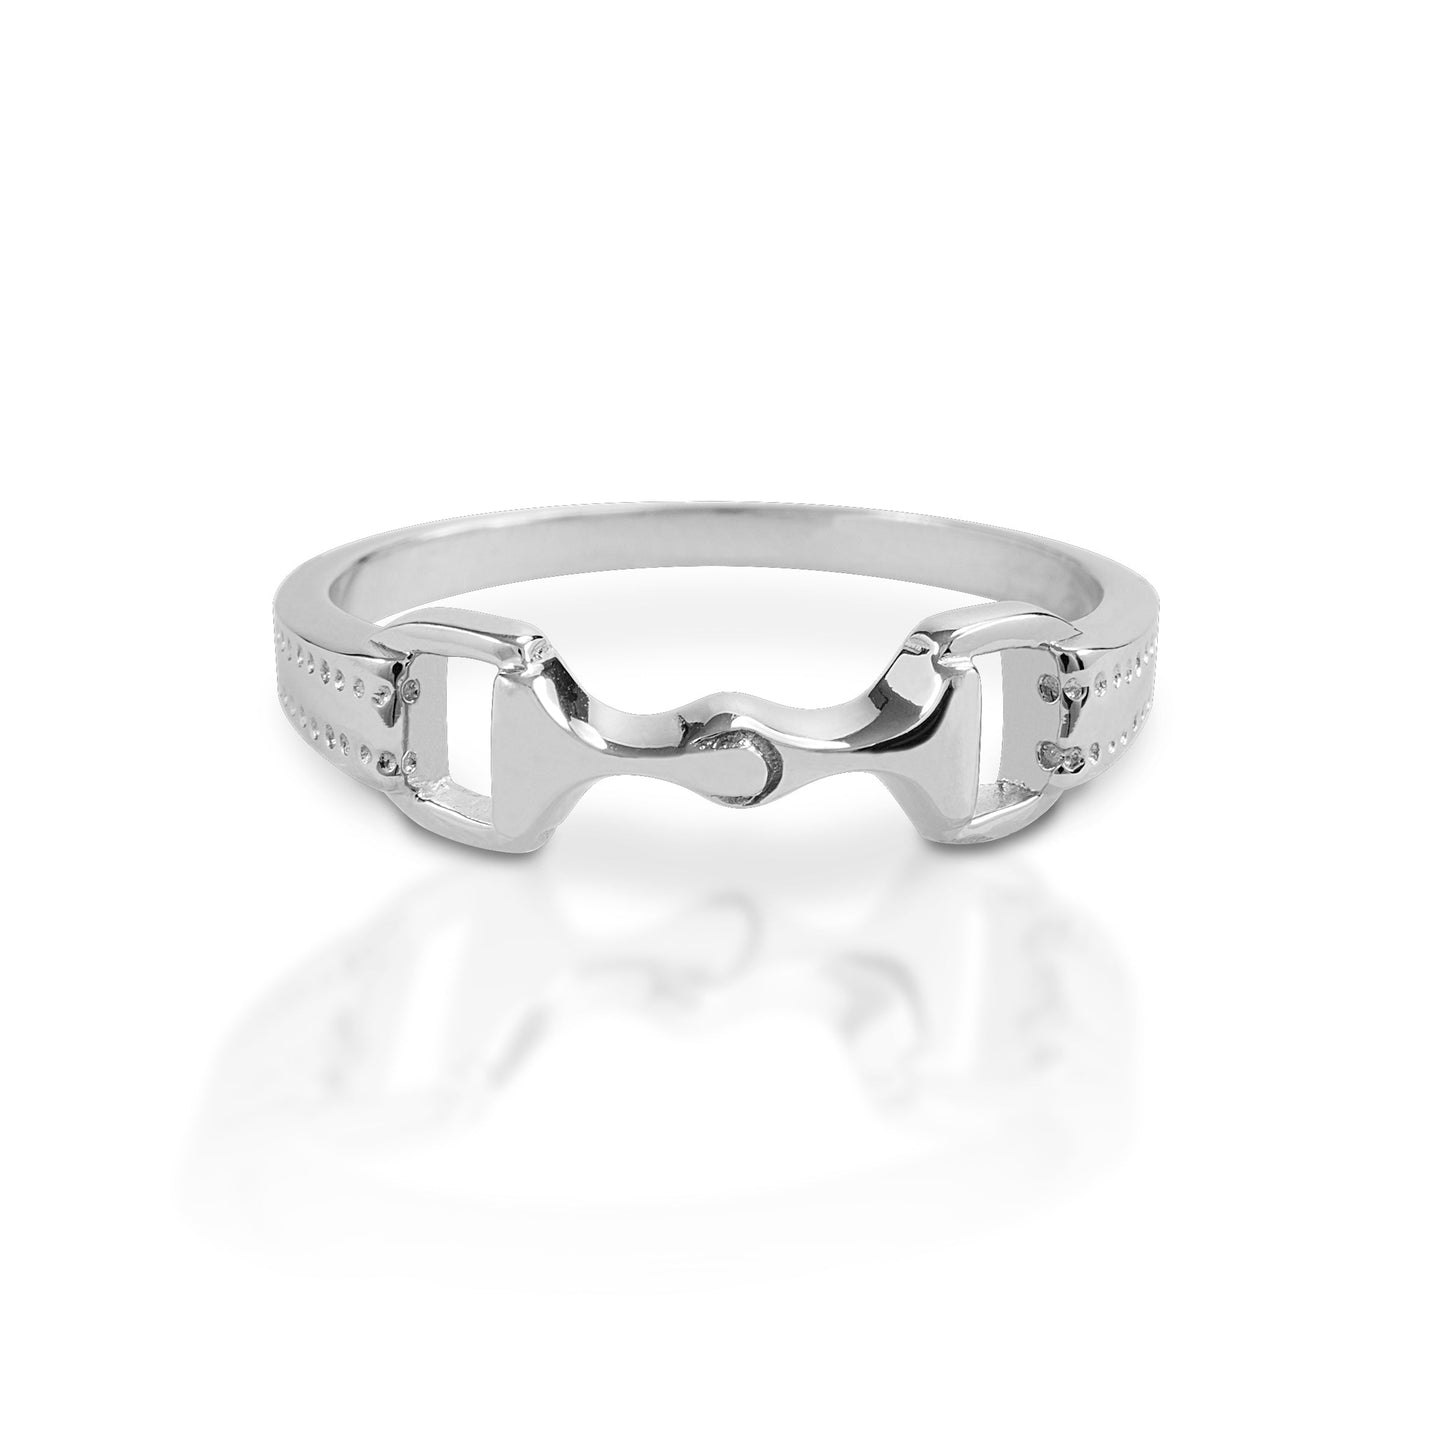 Silver Kelly Herd horseshoe ring with cubic zirconia accents on white.